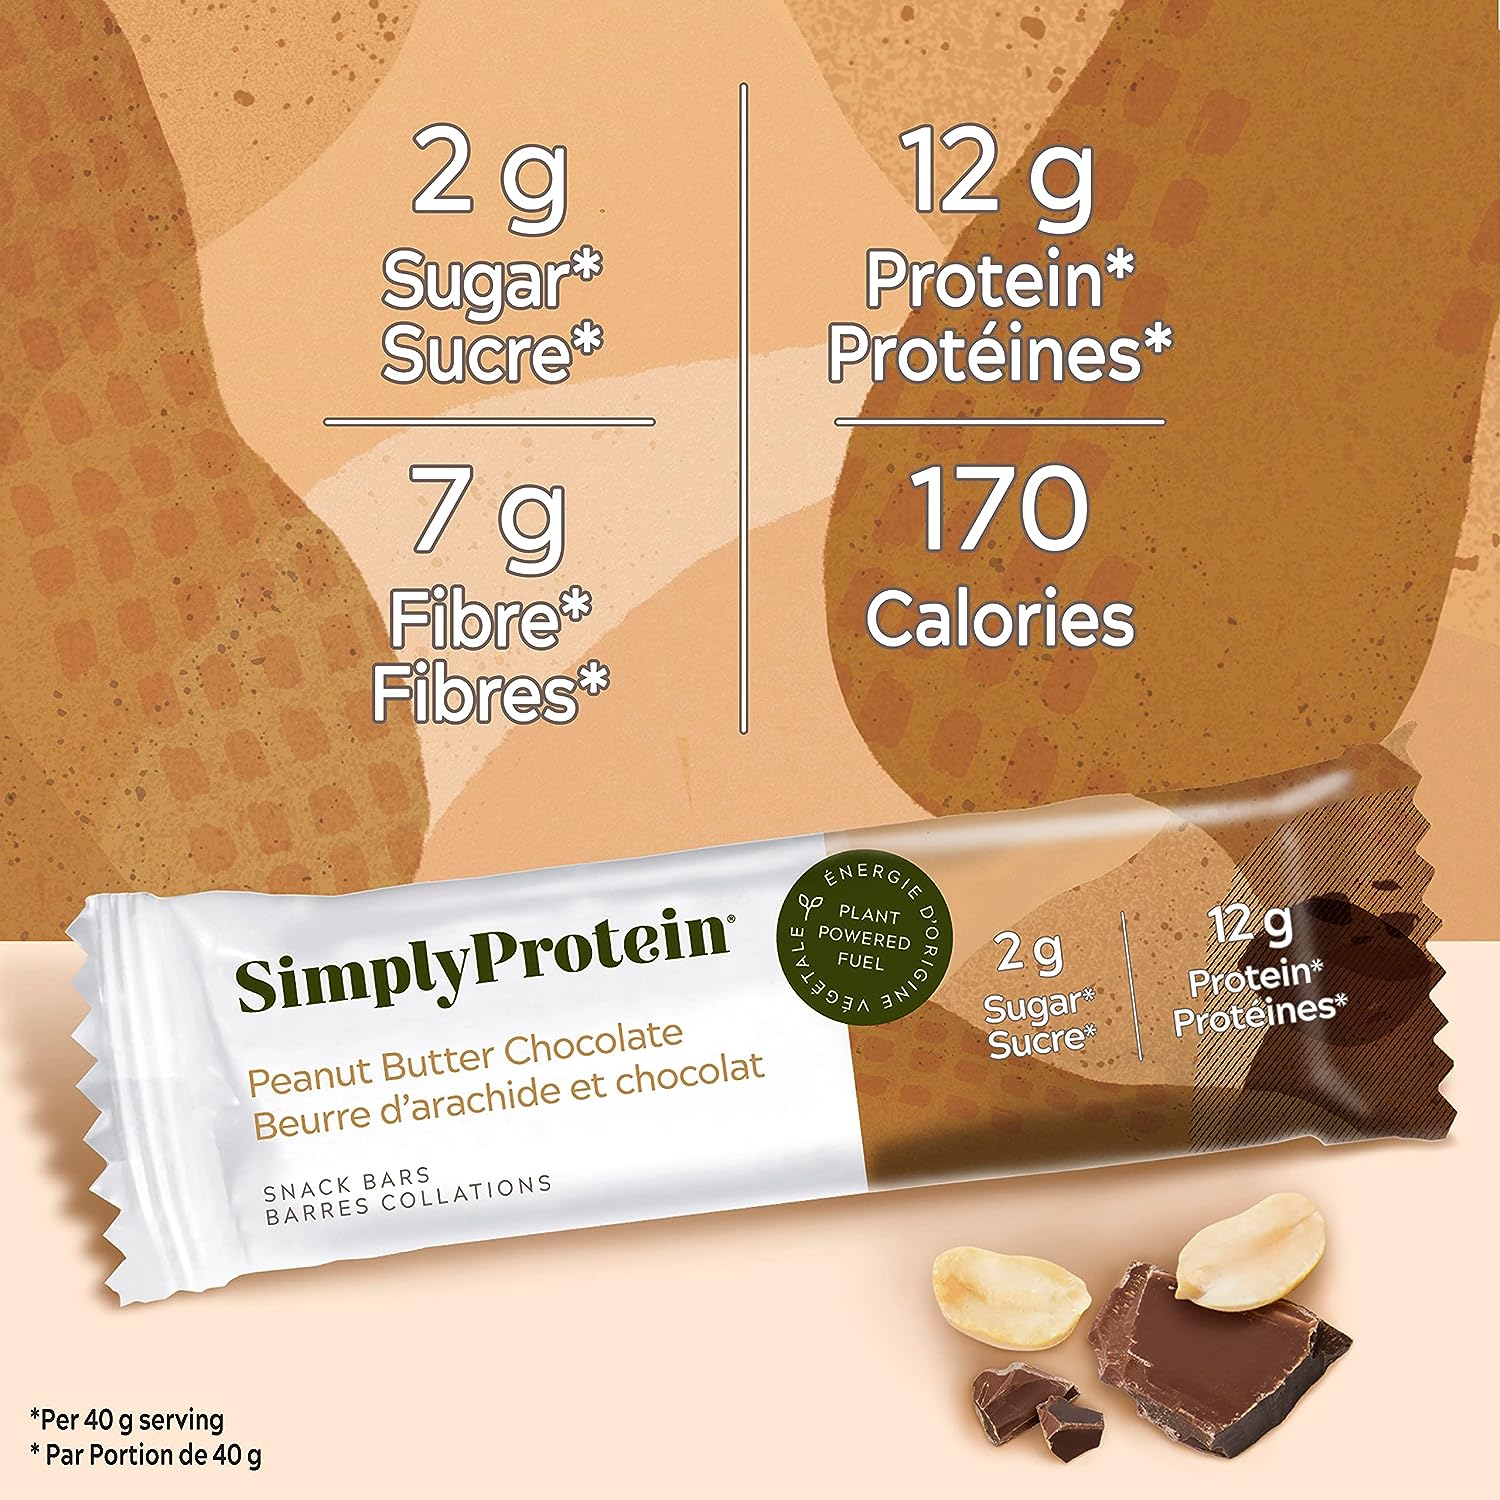 SimplyProtein Protein Snack Bar (1 bar) Protein Snacks Peanut Butter Chocolate SimplyProtein